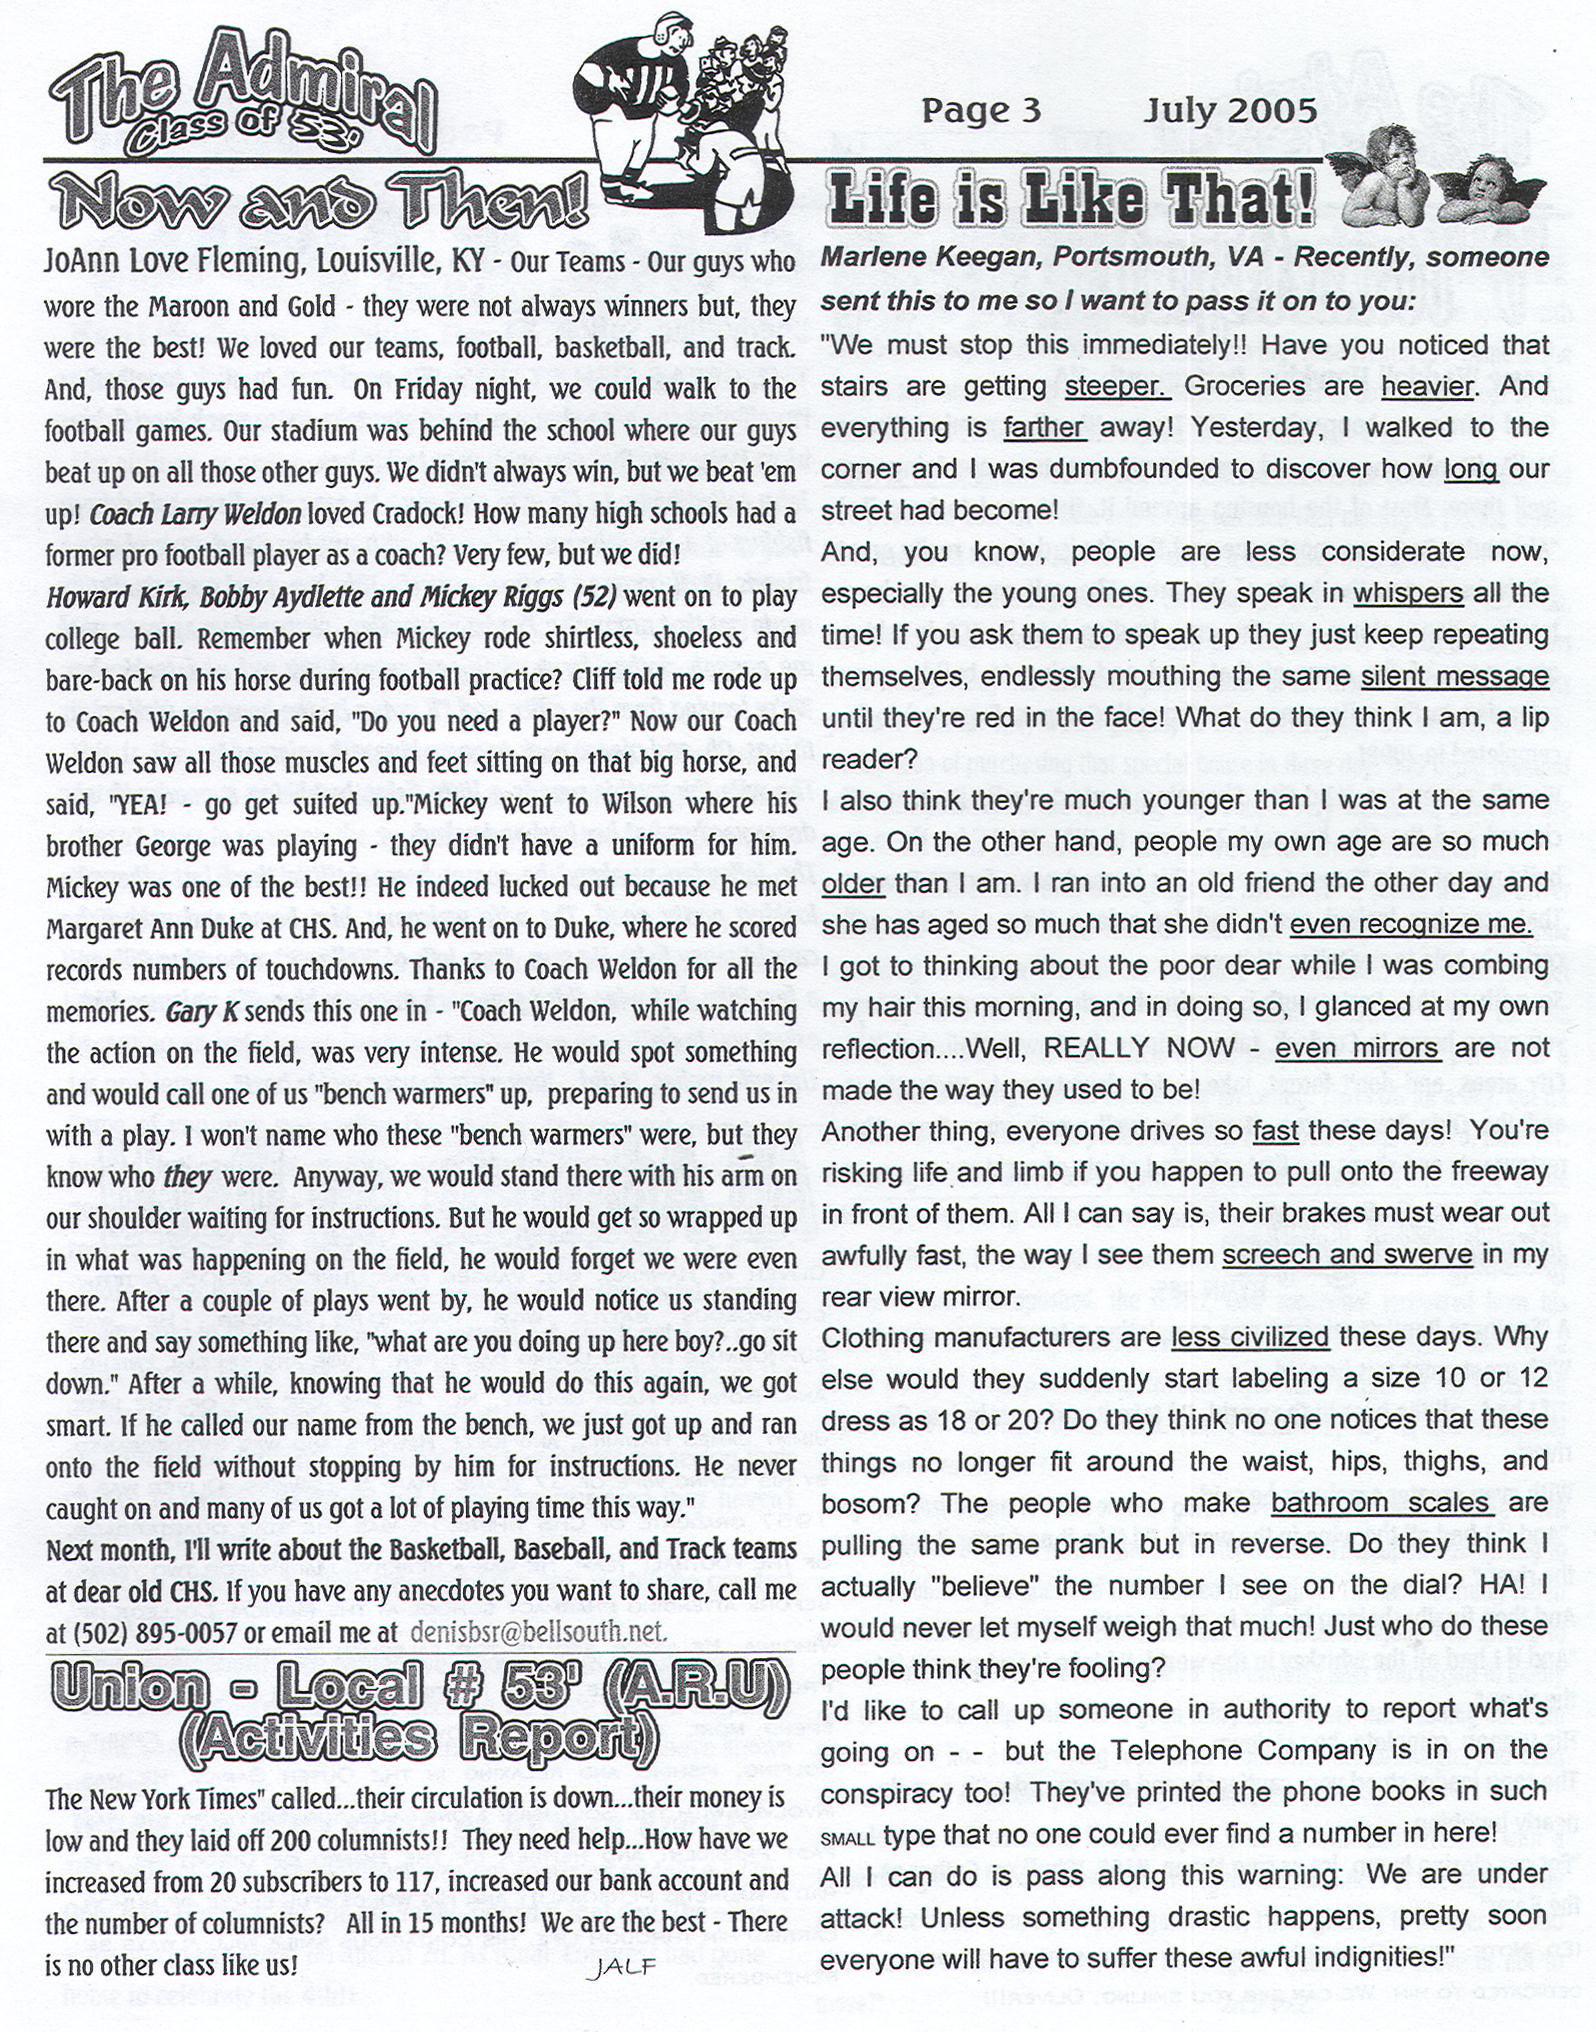 The Admiral - July 2005 - pg. 3